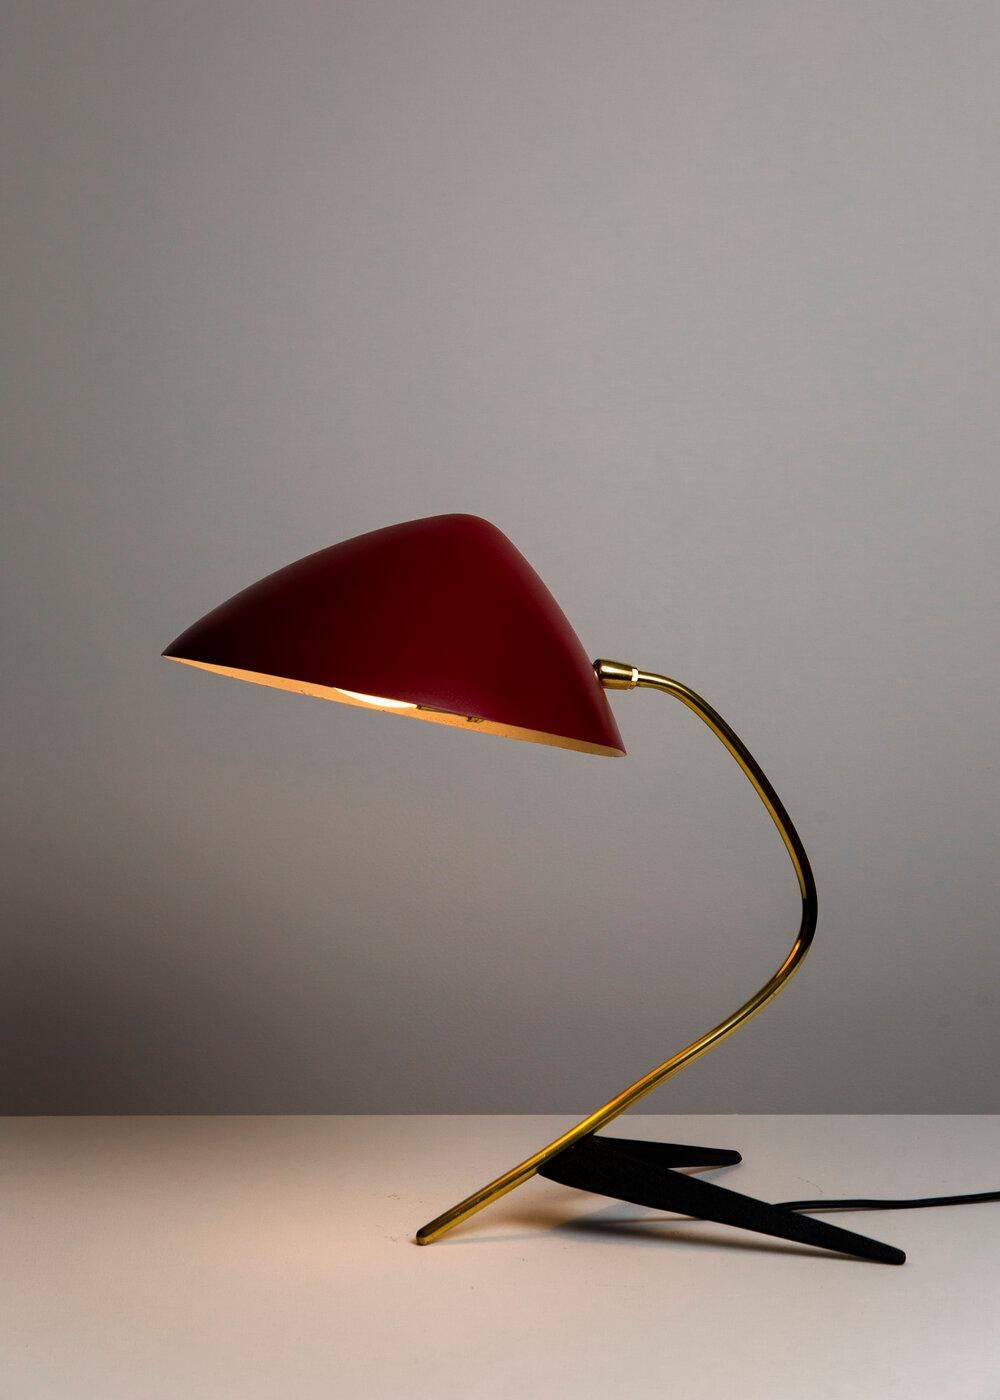 Large crow foot lamp by Stürzenhofecker and Becker for Gebrüder Cosack. Red Enameled hood-like shade, curved brass stem with brass pivot, black enameled steel foot. 60 watts E-26 Edison medium base incandescent bulb recommended or higher if